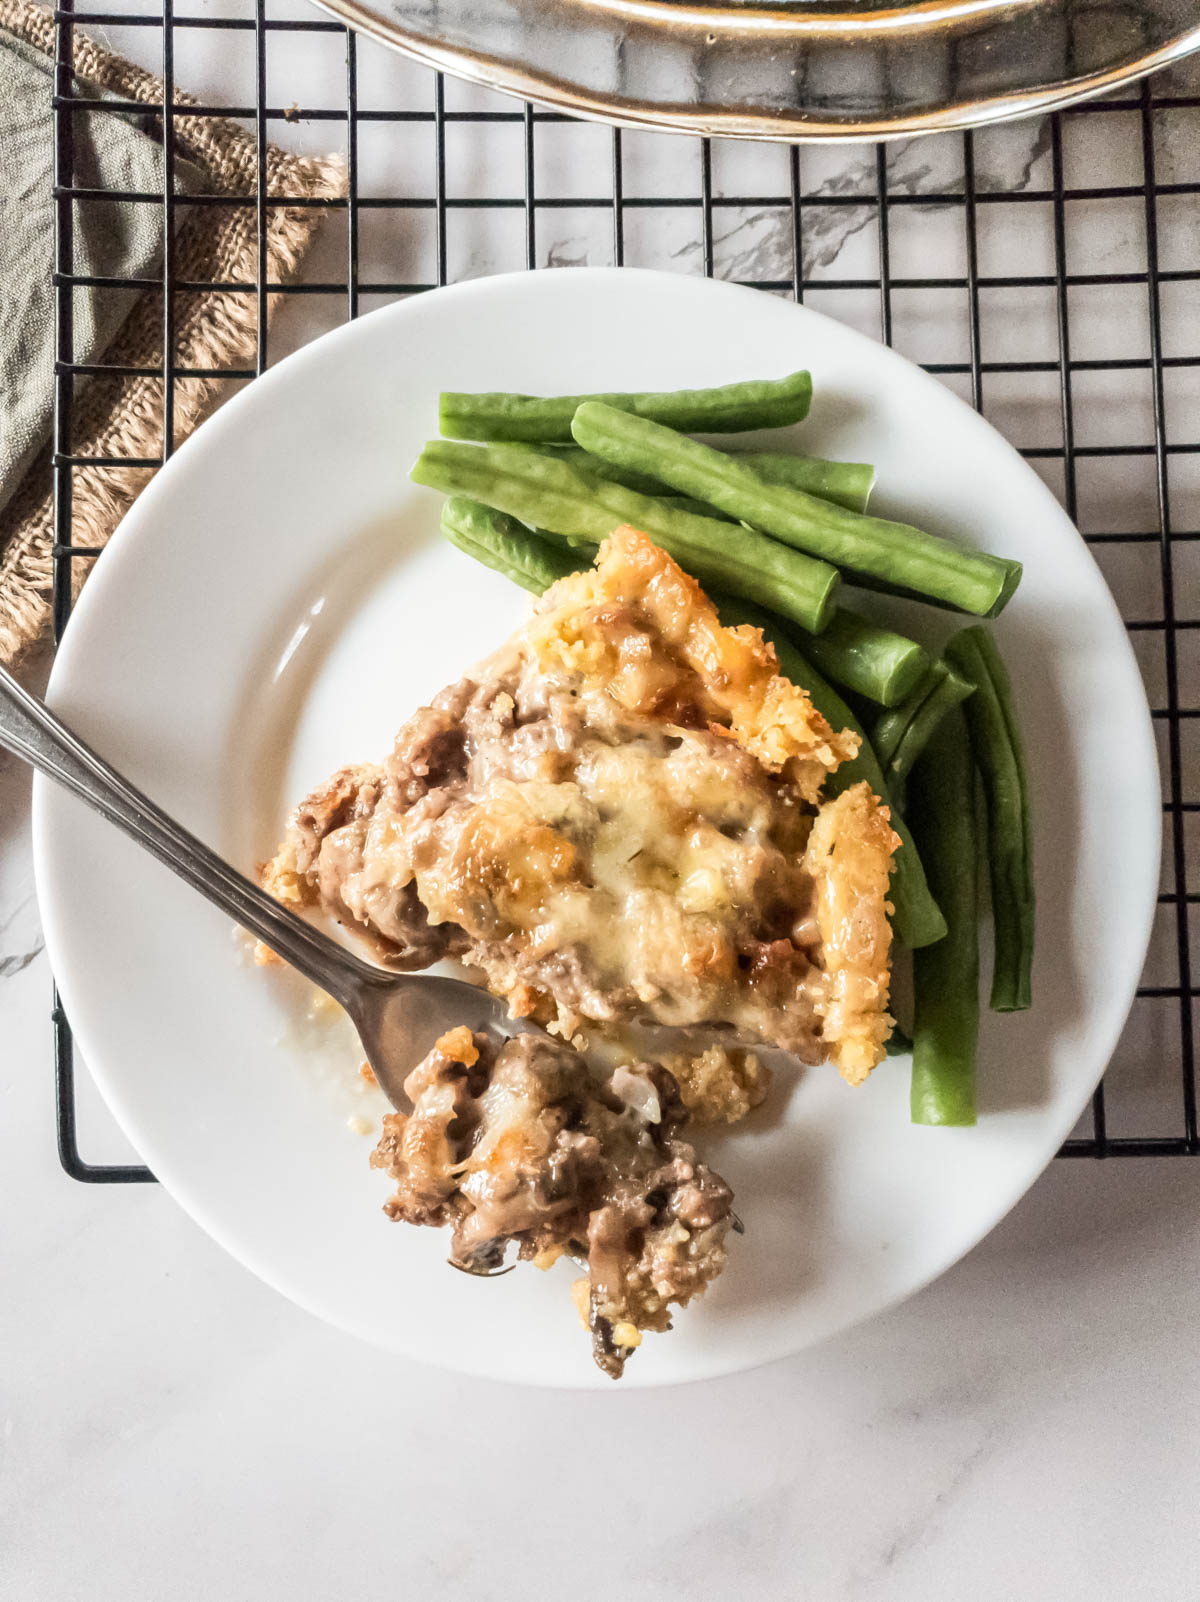 A keto meat pie with green beans on a plate with a fork taking a bite.